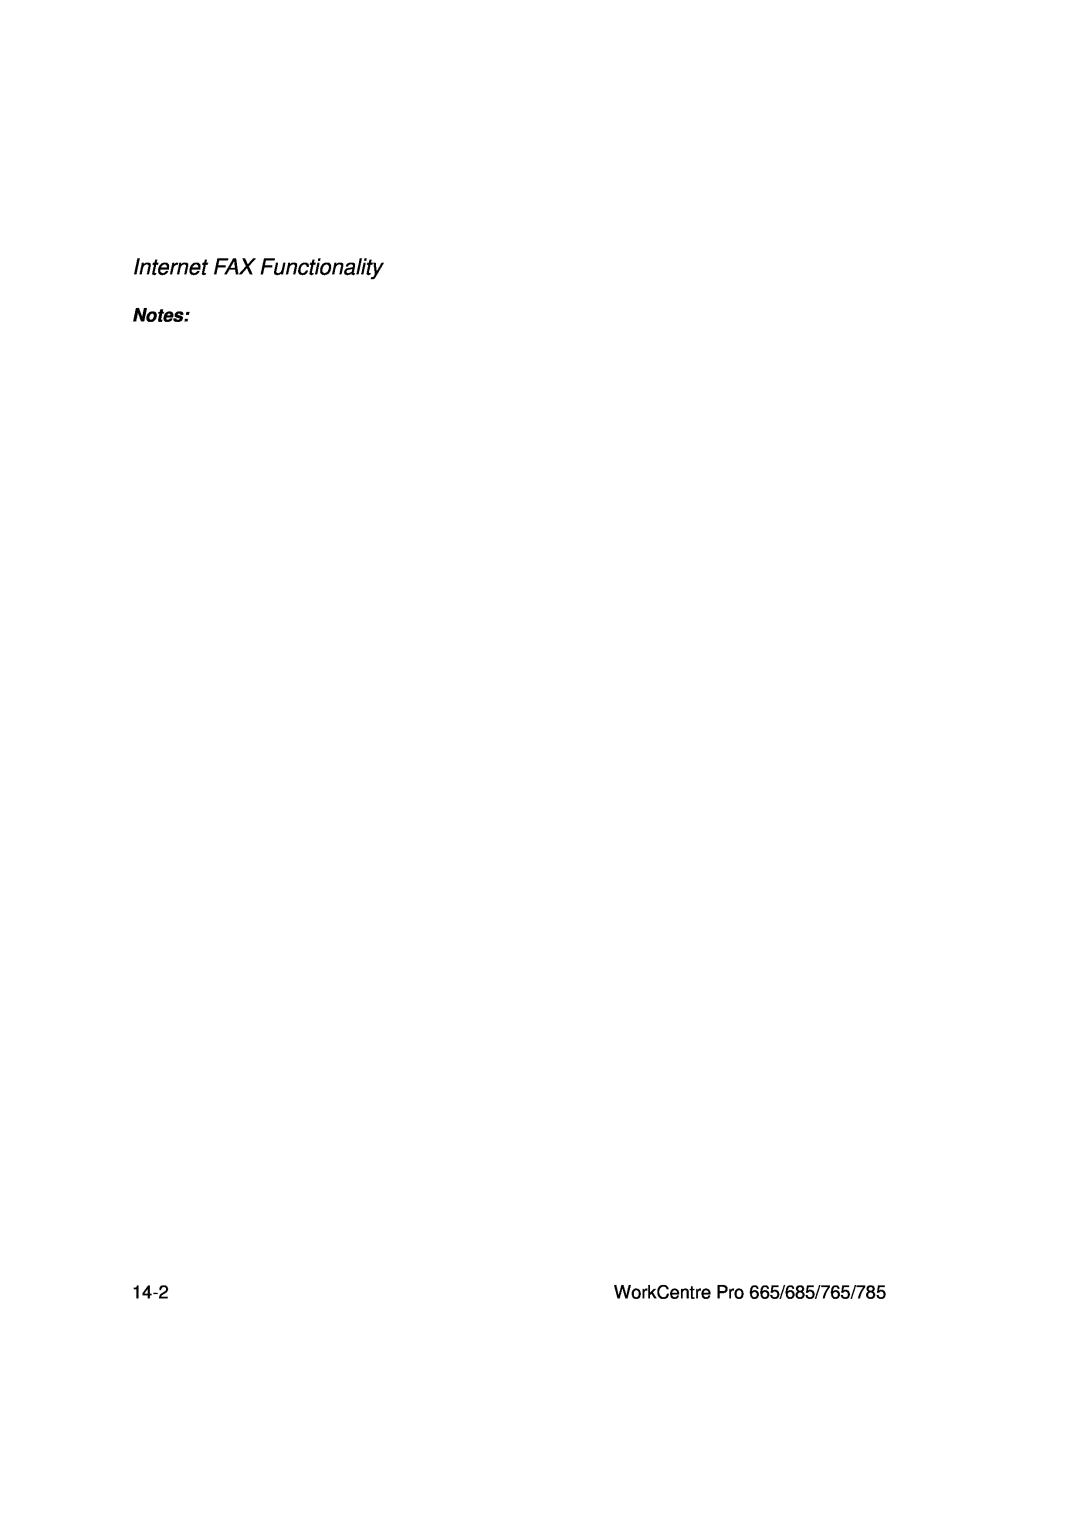 Xerox manual Internet FAX Functionality, Notes, 14-2, WorkCentre Pro 665/685/765/785 